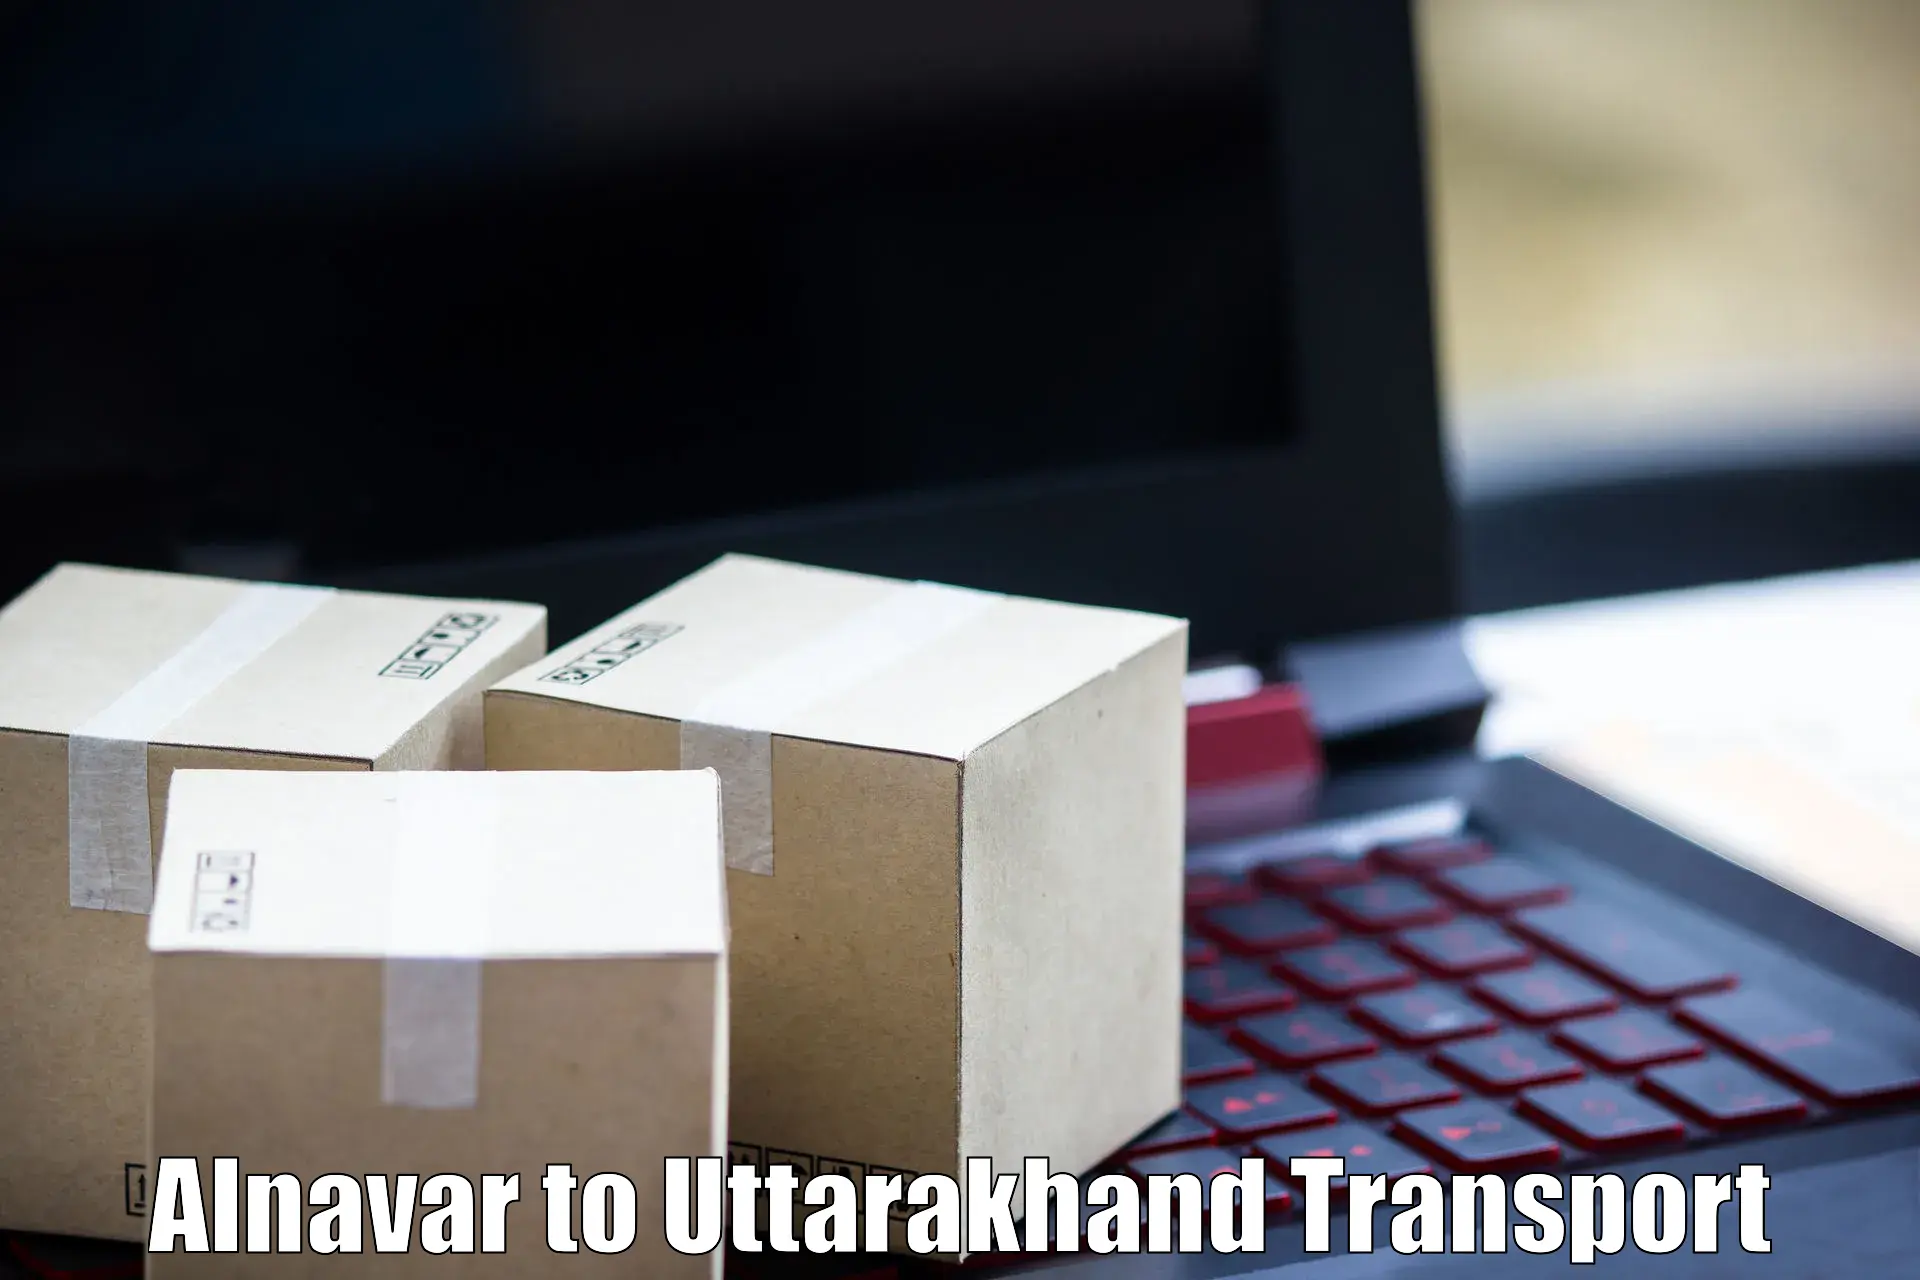 Nationwide transport services in Alnavar to Rishikesh